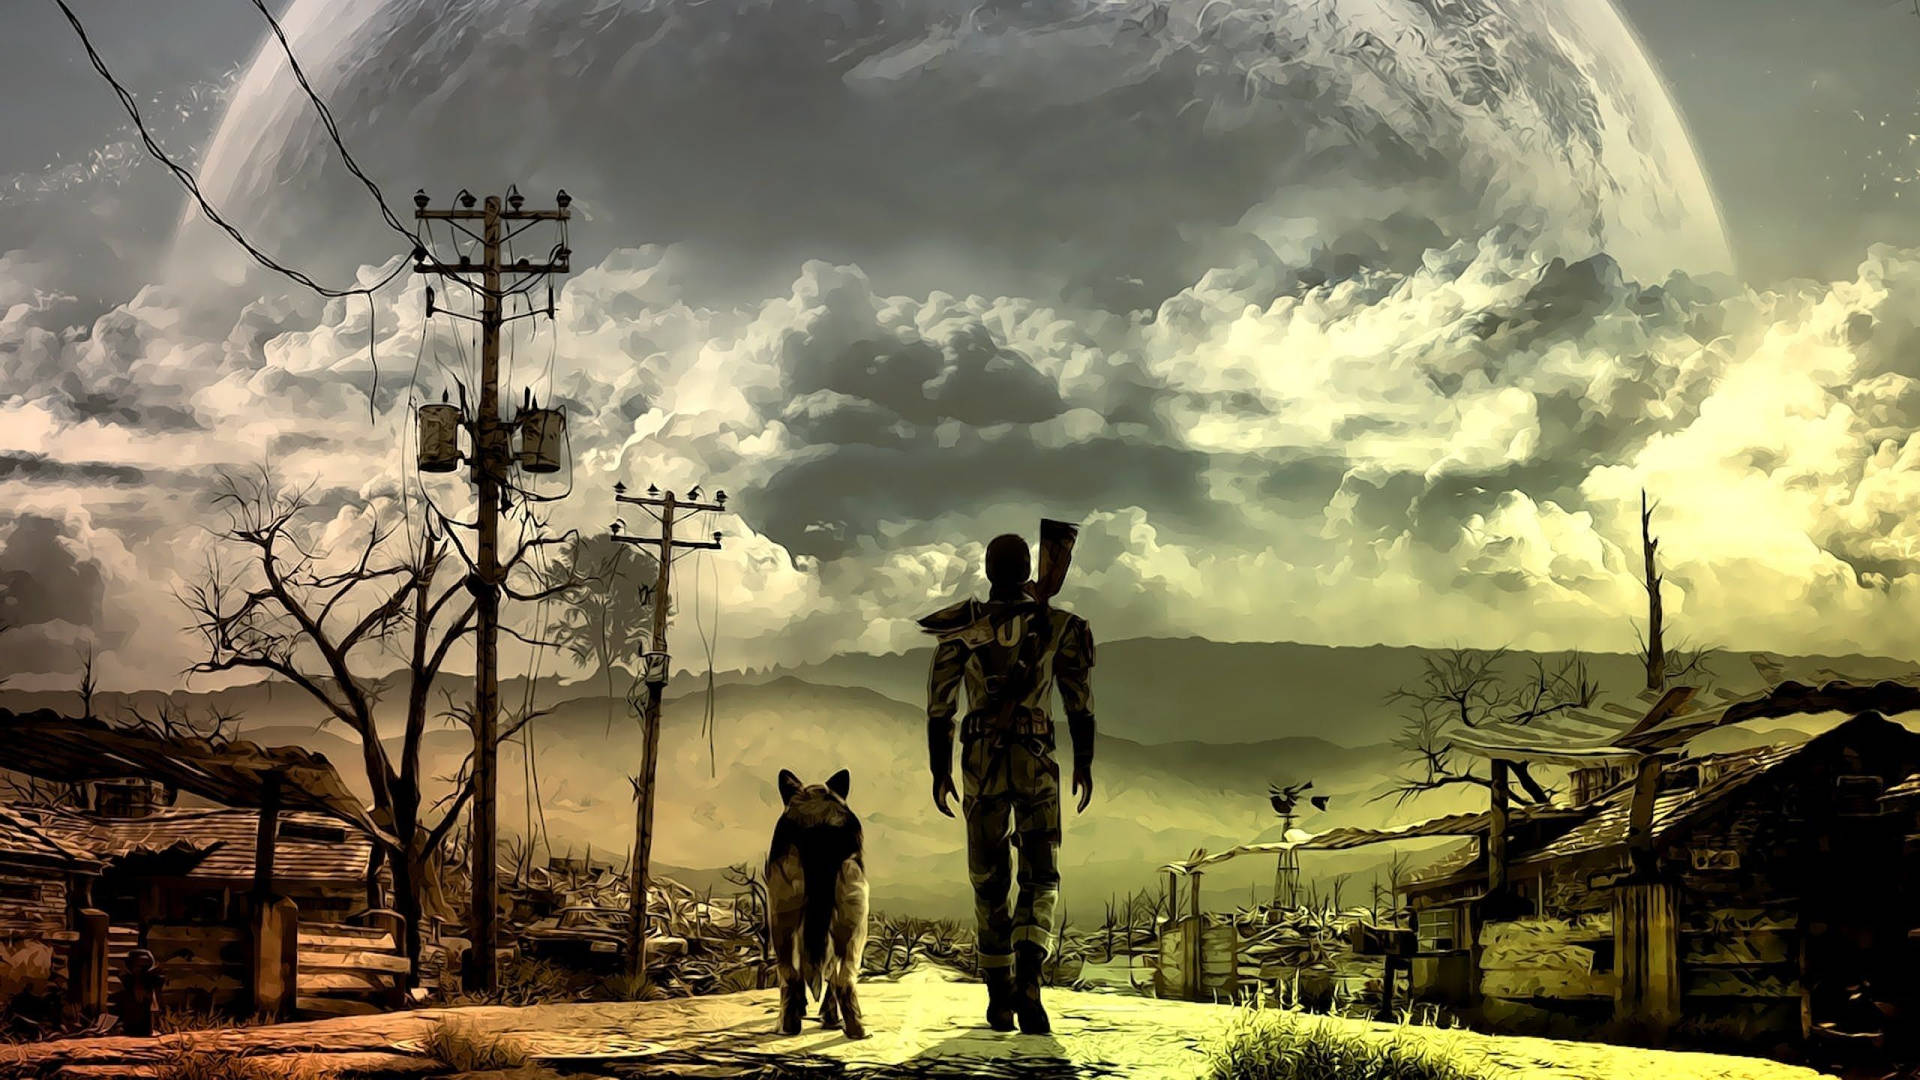 Reuniting the Family in Post-Apocalyptic America Wallpaper